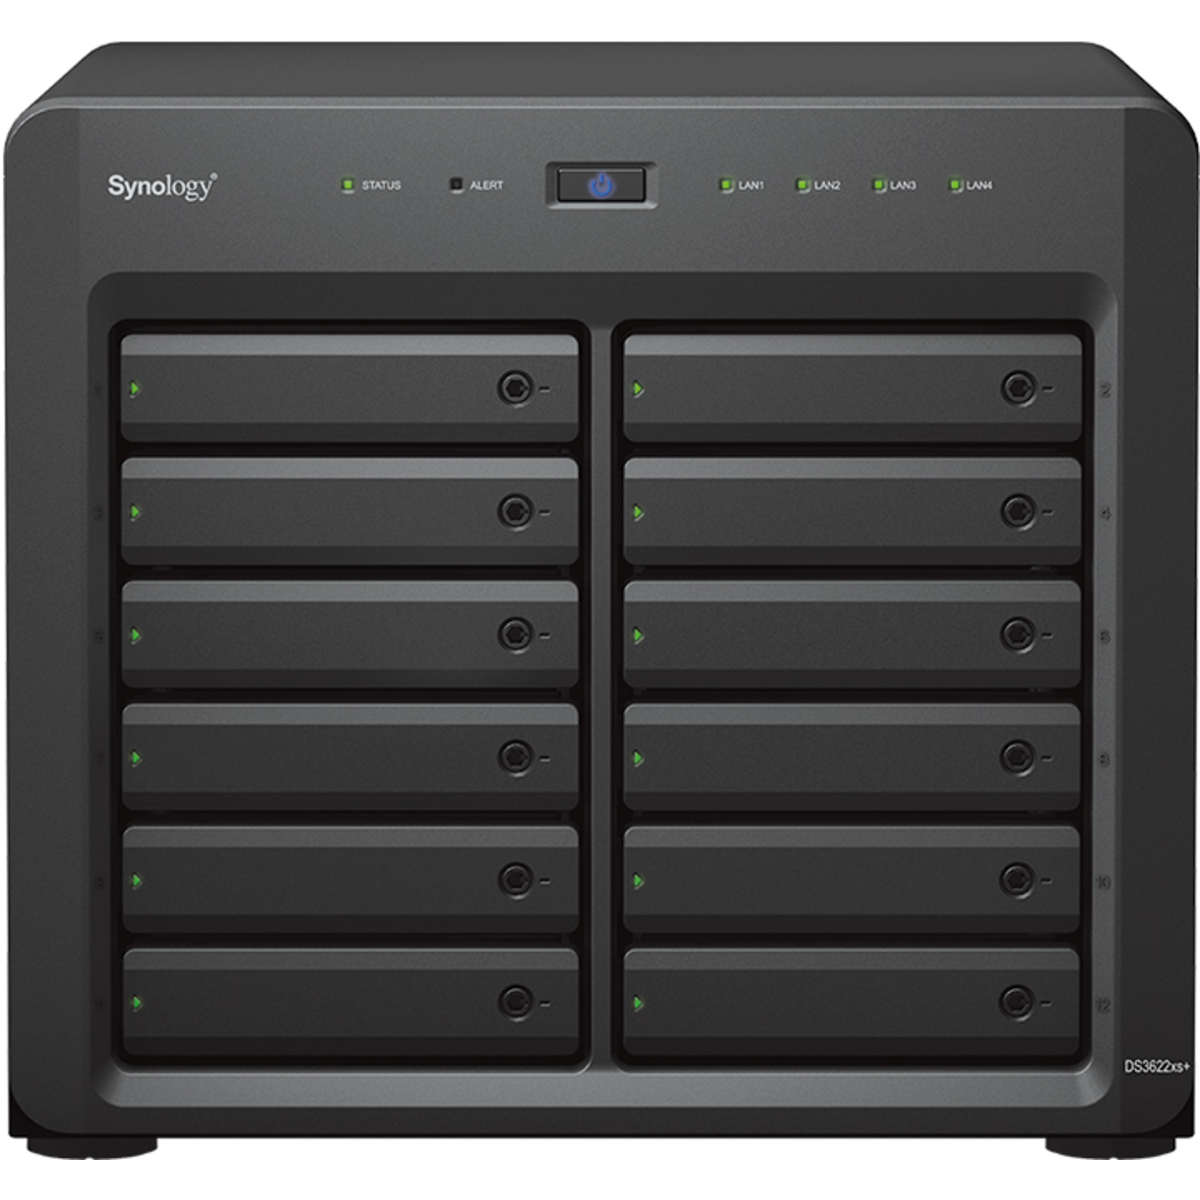 Synology DiskStation DS3622xs+ 80tb 12-Bay Desktop Multimedia / Power User / Business NAS - Network Attached Storage Device 8x10tb Seagate IronWolf Pro ST10000NT001 3.5 7200rpm SATA 6Gb/s HDD NAS Class Drives Installed - Burn-In Tested - ON SALE DiskStation DS3622xs+